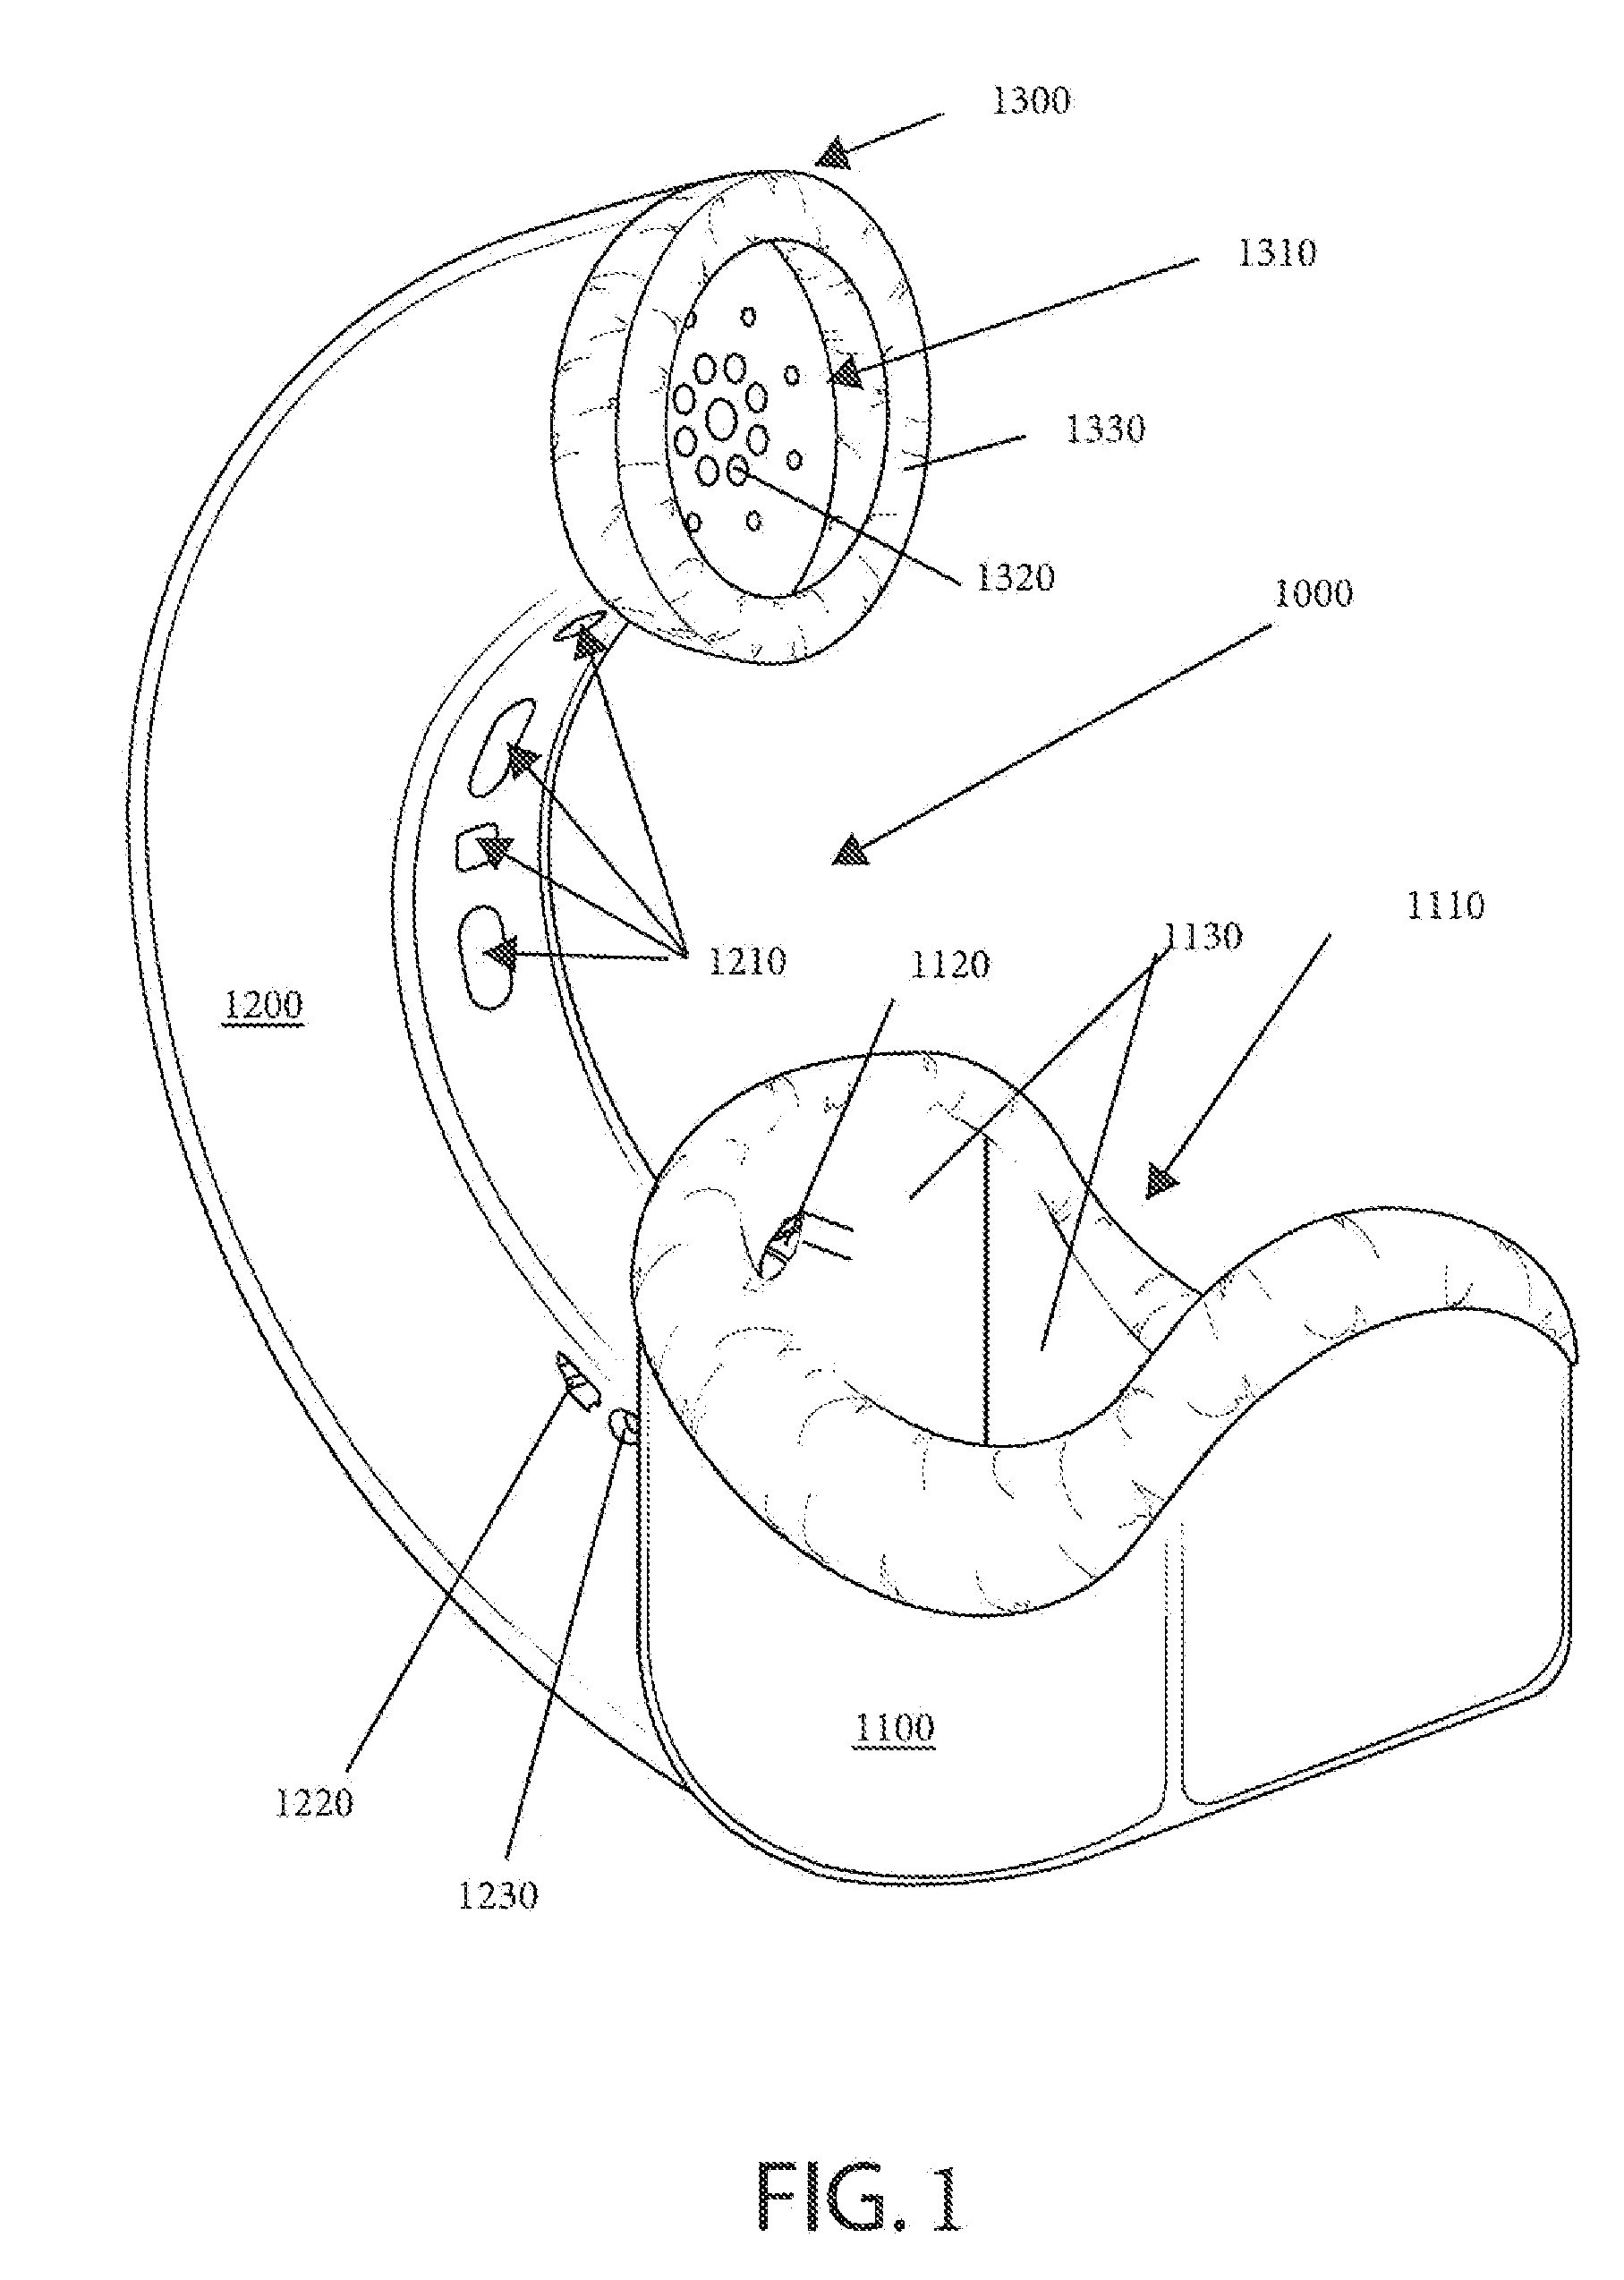 Ergonomic tubular anechoic chambers for use with a communication device and related methods